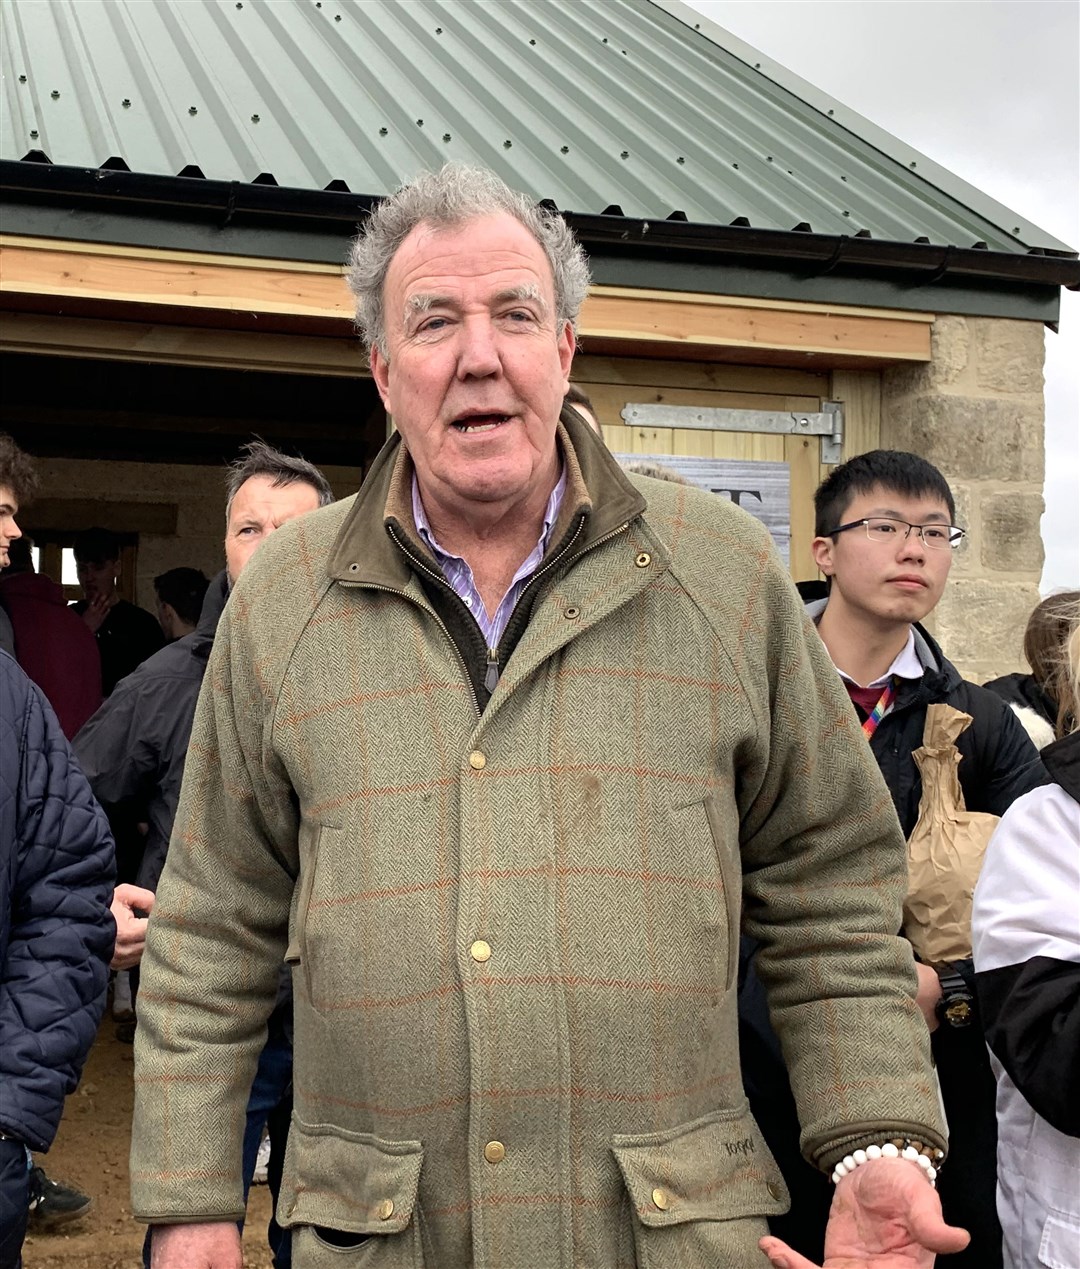 A planning inspectorate is currently deciding whether Jeremy Clarkson should be able to extend a car park on his Diddly Squat Farm (Blackball Media)